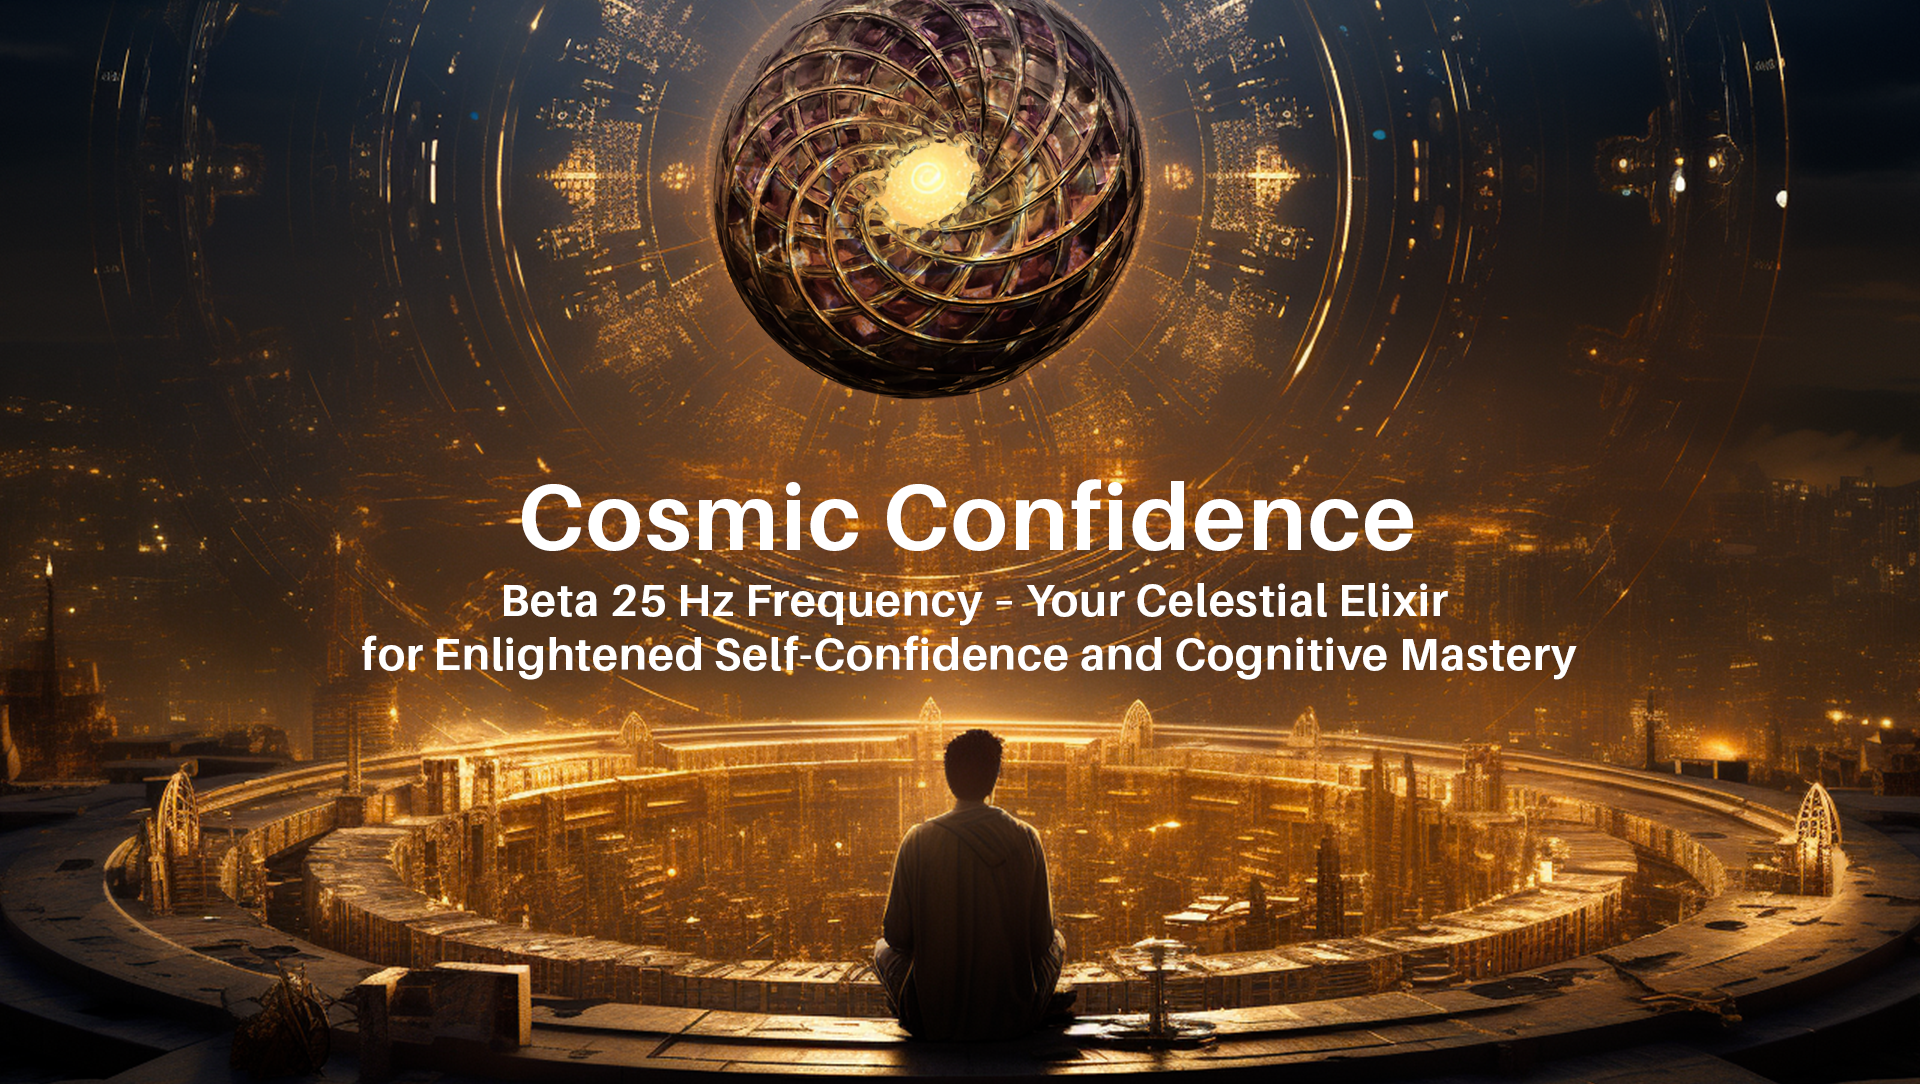 Cosmic Confidence: Beta 25 Hz Frequency – Your Celestial Elixir for Enlightened Self-Confidence and Cognitive Mastery